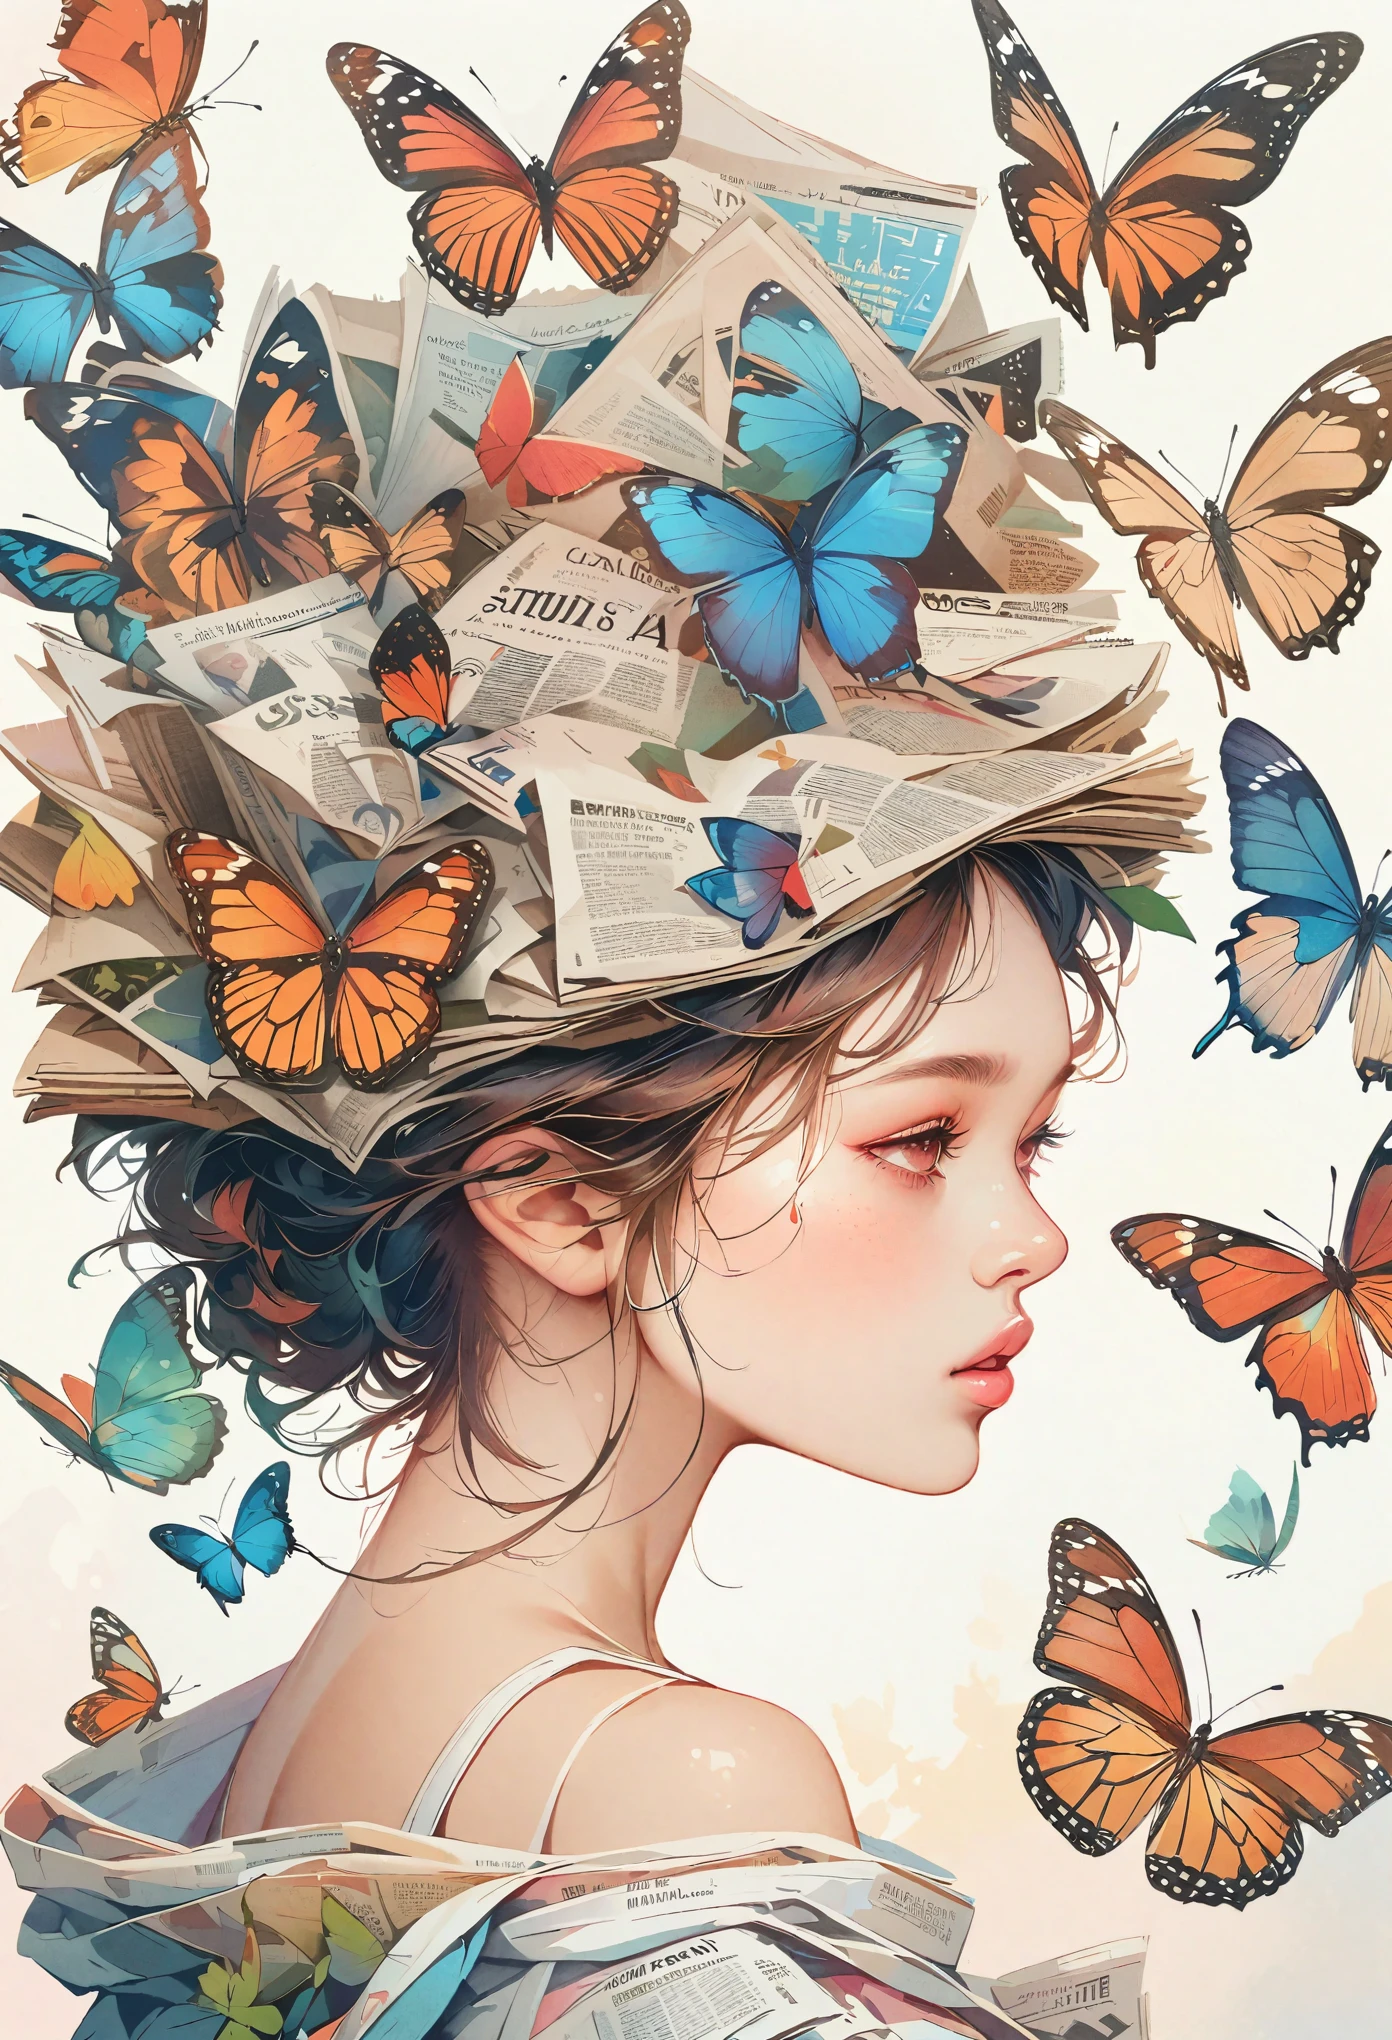 Girls side profile avatar, alone, Wearing a magazine cover dress, Detailed facial features and long eyelashes, A butterfly perches on her head, Surrounded by a row of newspaper clippings. The girl&#39;s face is very realistic and detailed, Bright colors、clear focus. The overall image is a high-resolution masterpiece, Perfect for magazine covers. The art style is a mix of photography and conceptual art. The shades are vibrant、striking. The lighting is studio style, Features soft and soft lighting. This tip also includes text and barcodes commonly found on magazine covers.